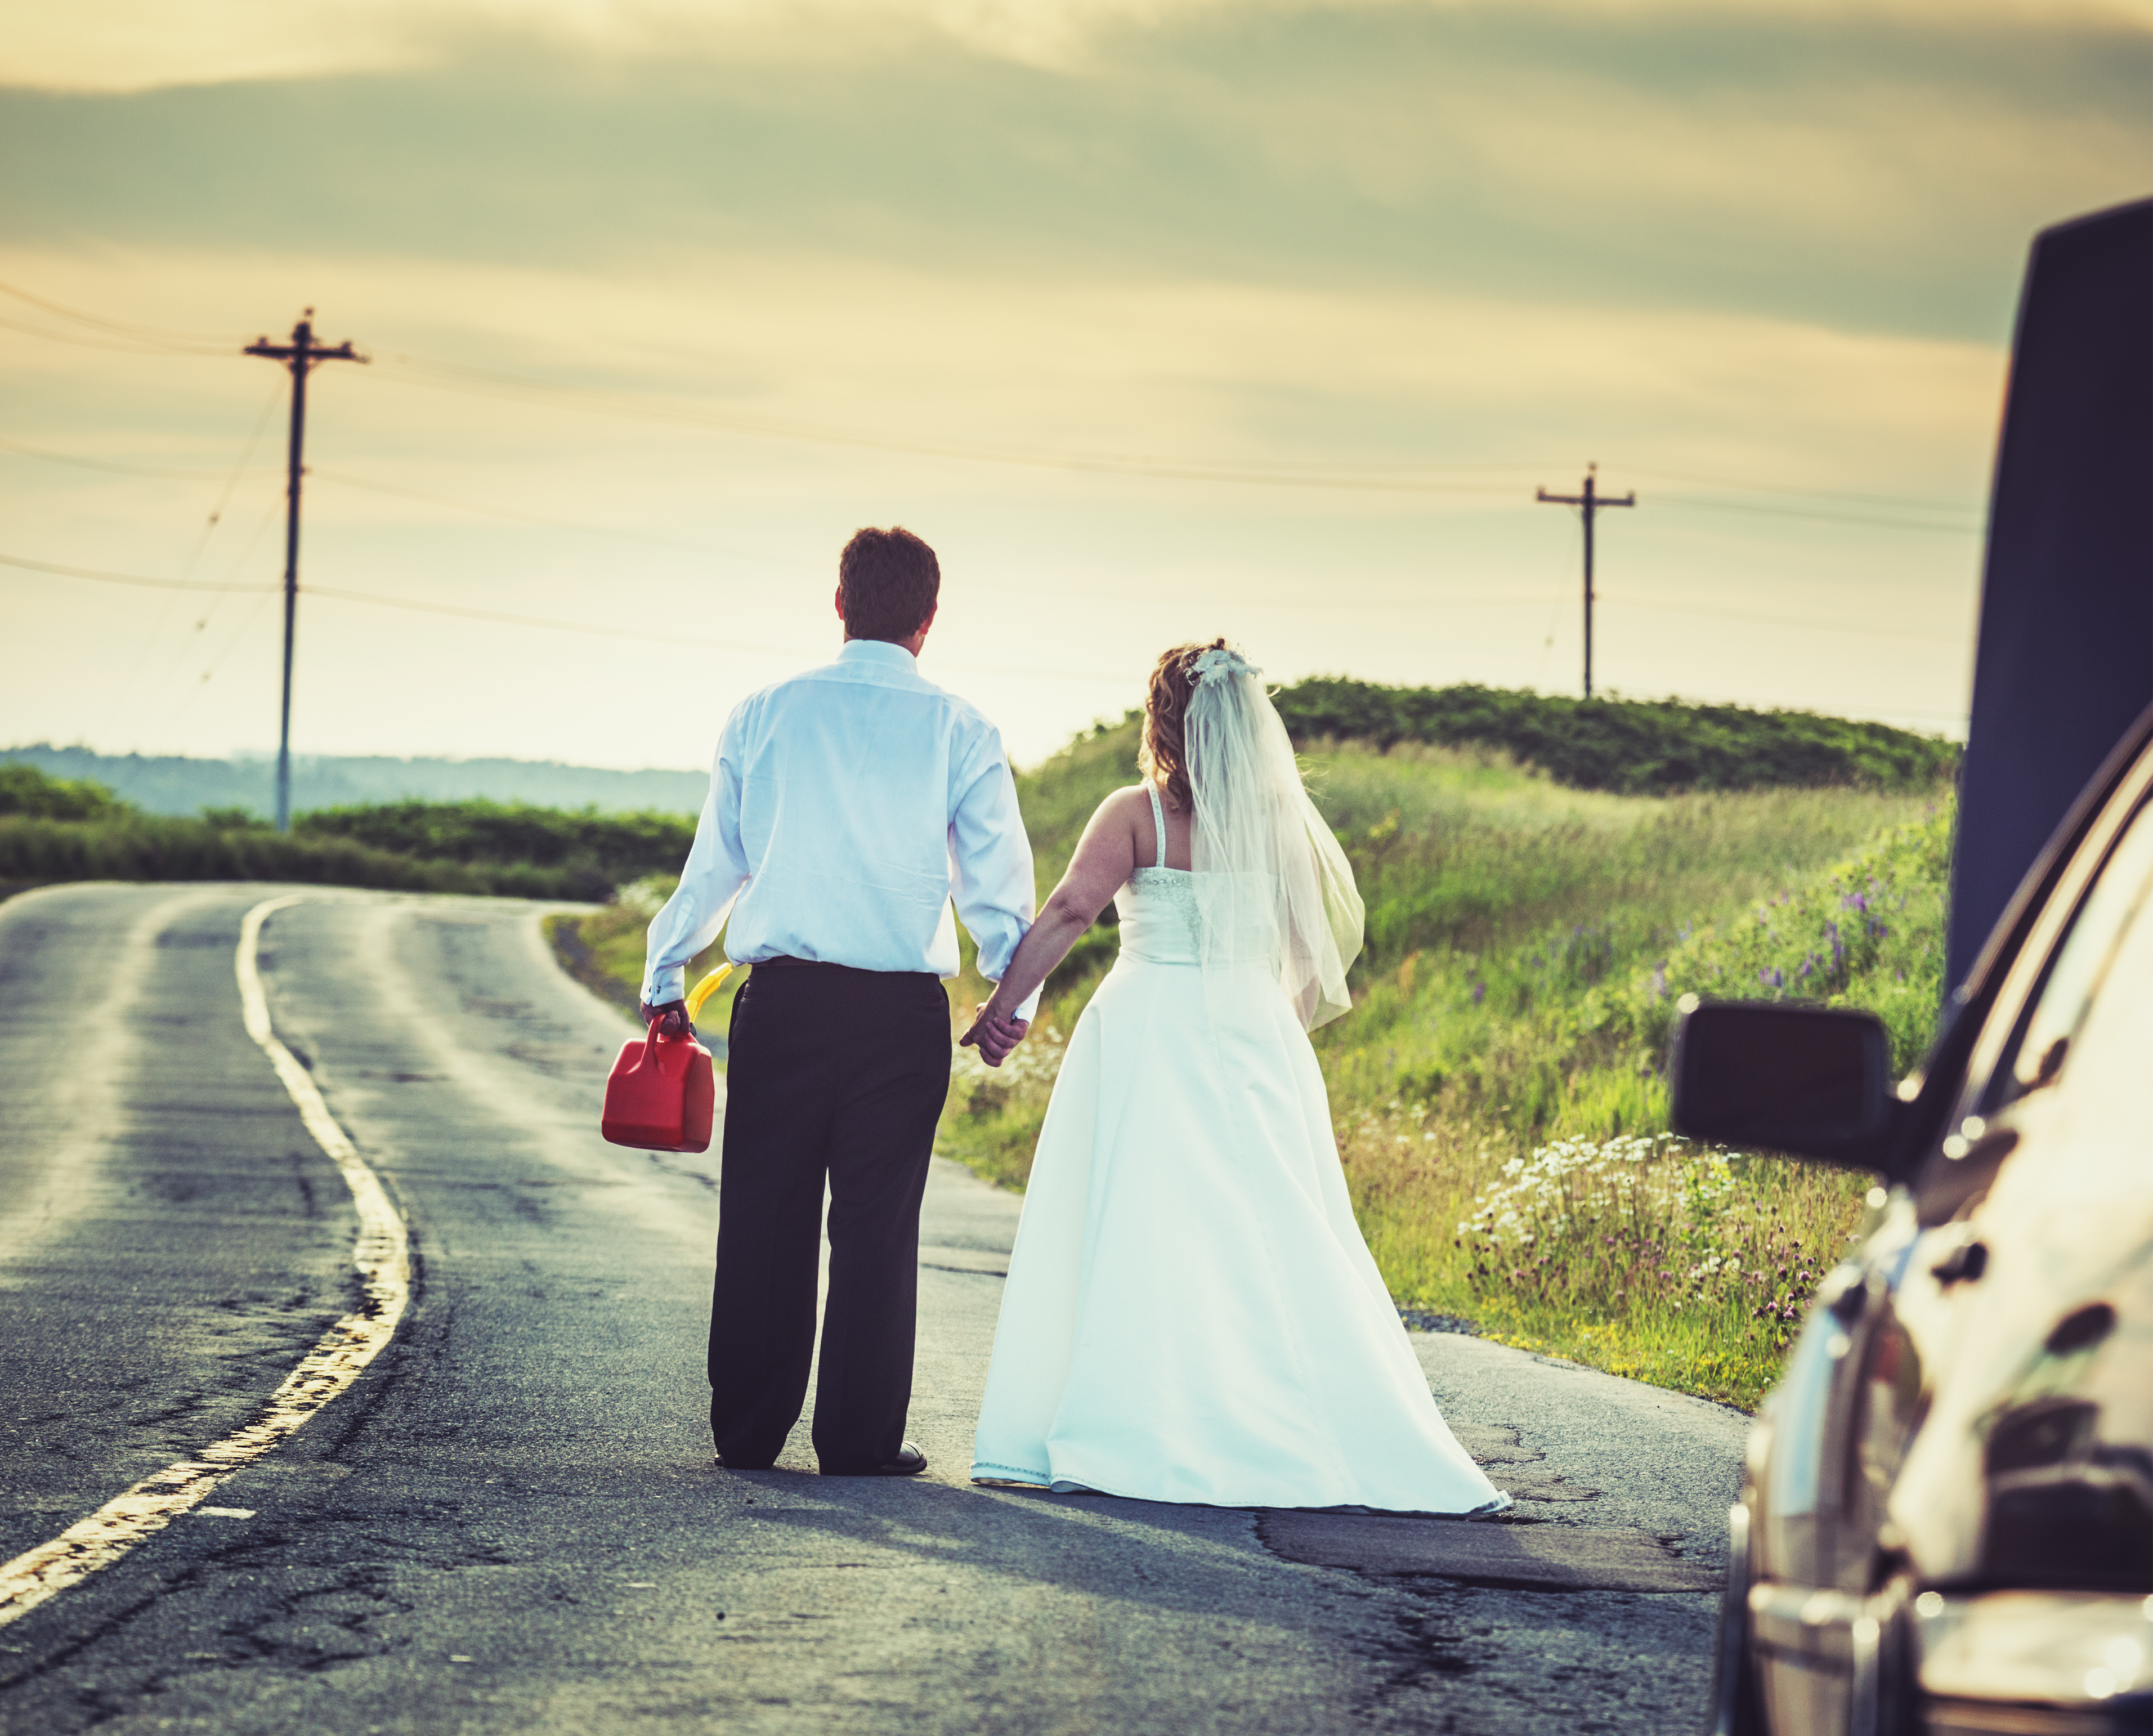 Newly wed couple stuck without petrol on the side of the road holding an empty petrol tank